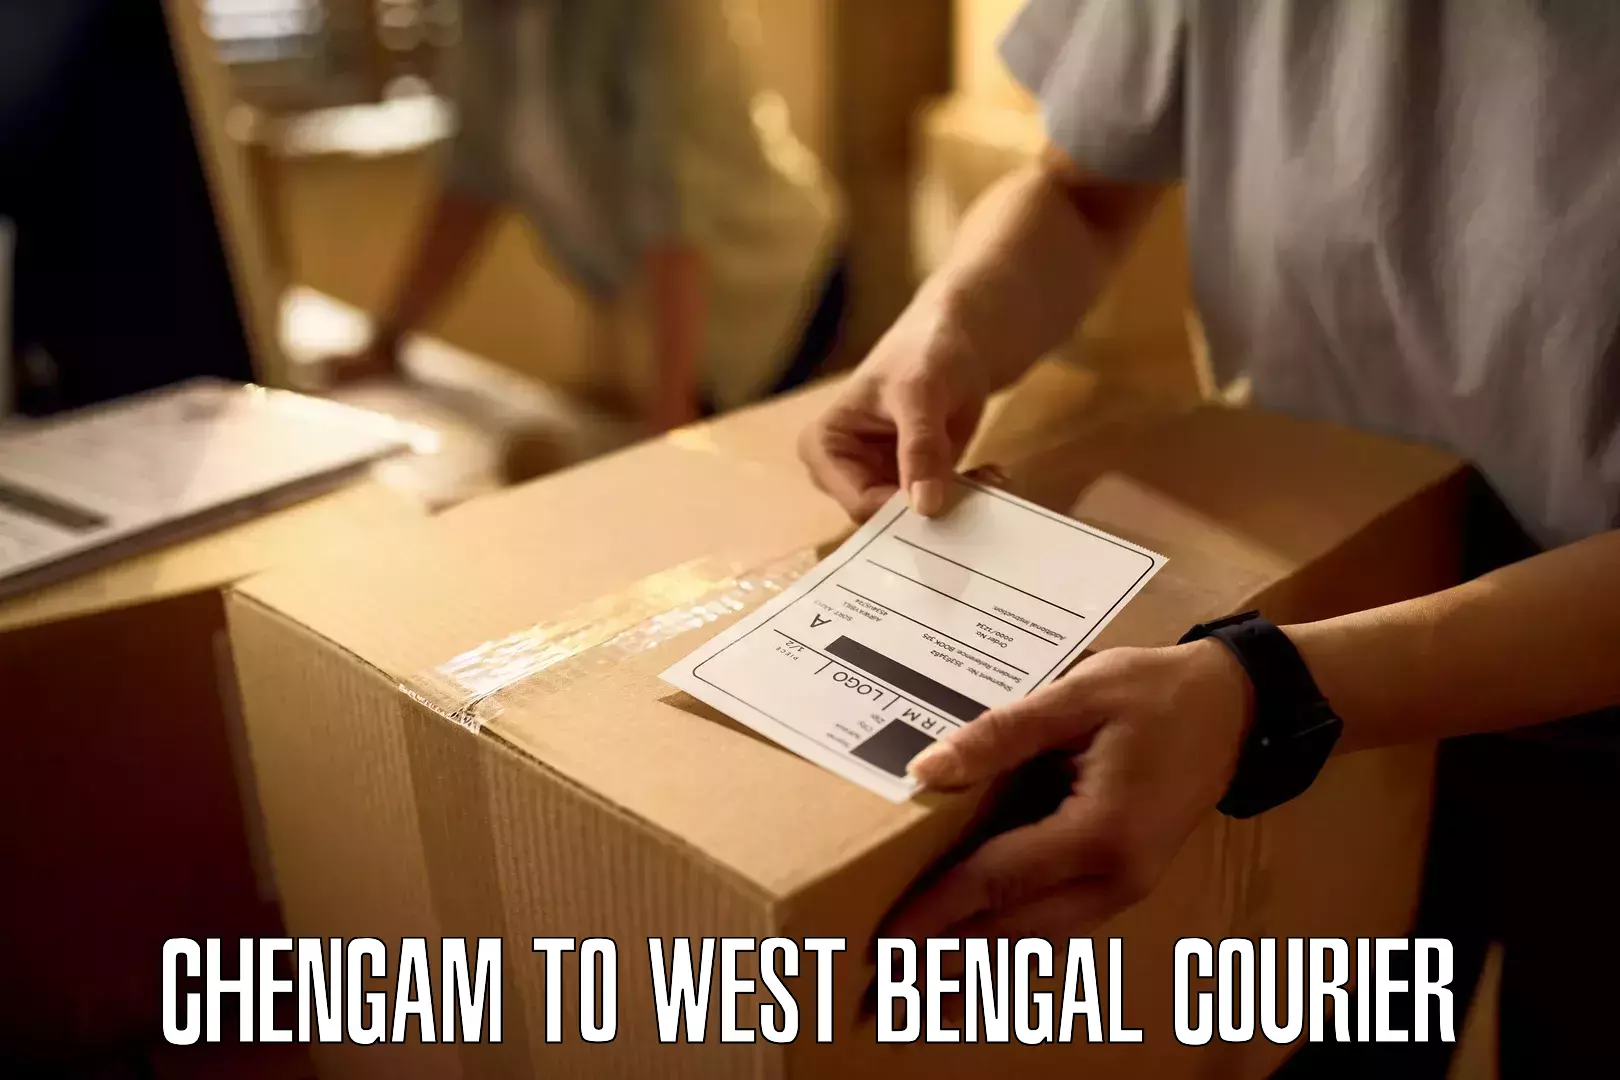 Personal courier services in Chengam to Adampur Barddhaman